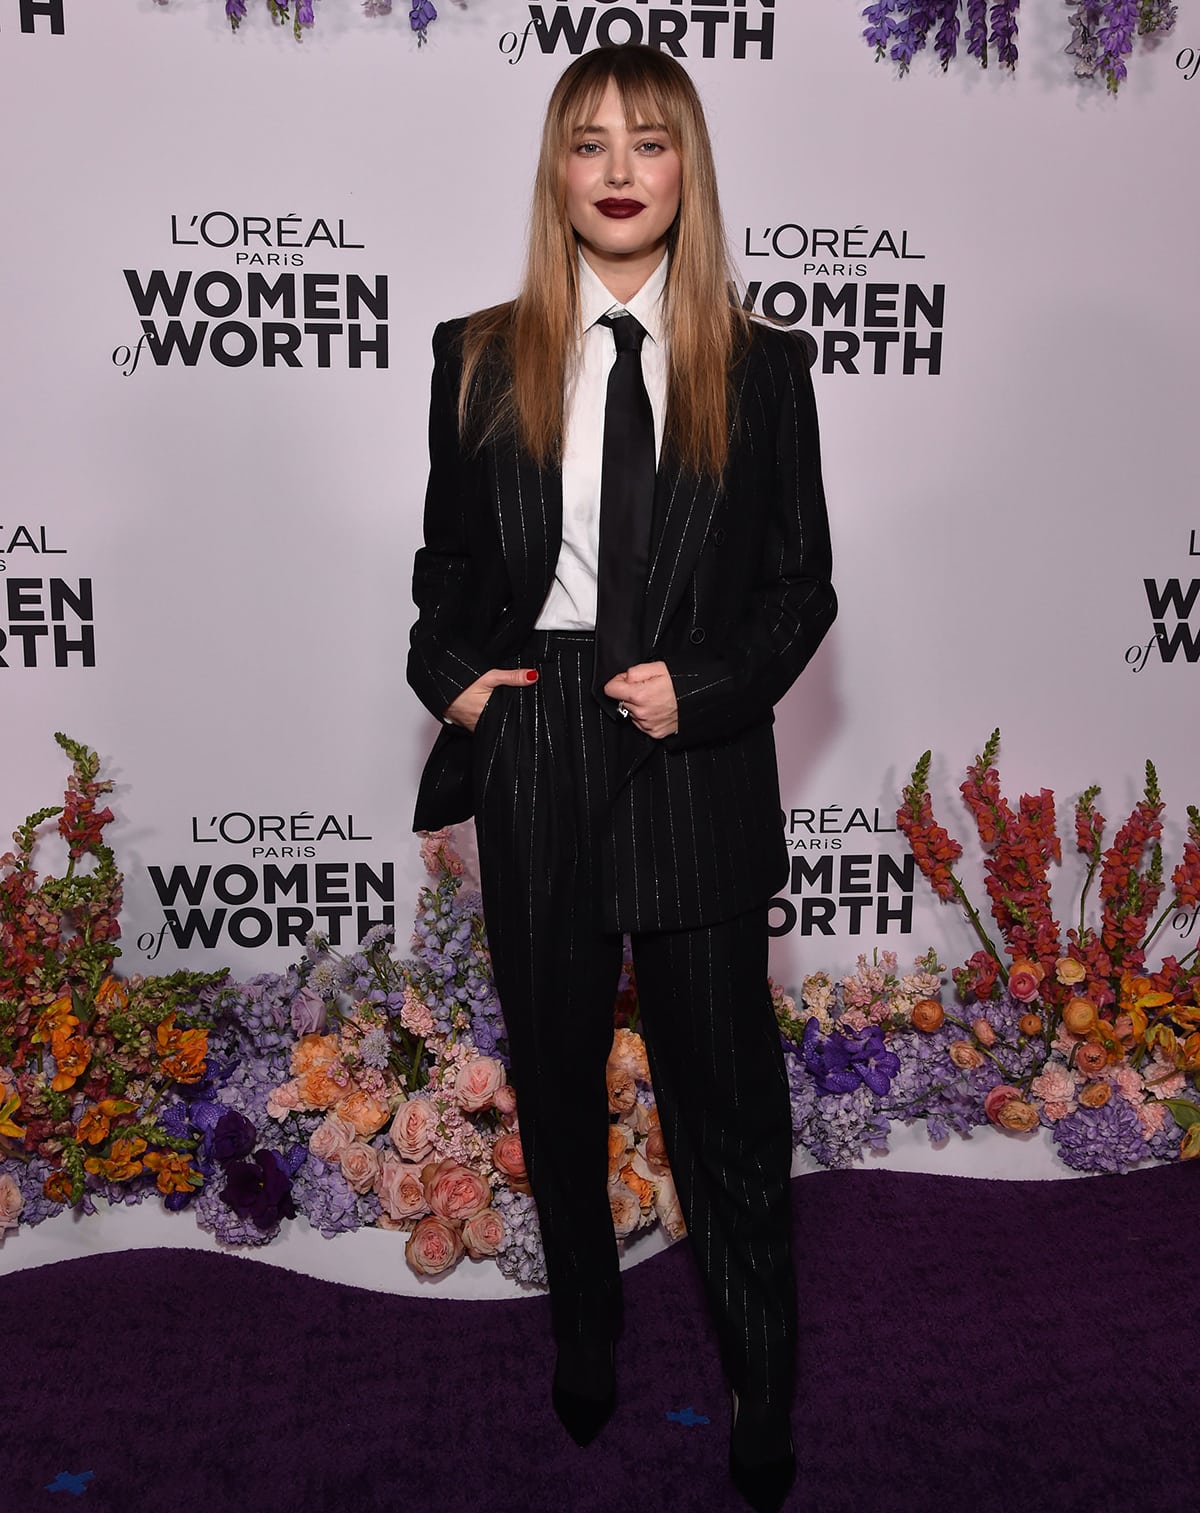 Katherine Langford takes inspiration from Julia Roberts in a menswear pinstripe suit with a white shirt and a black tie by Armani